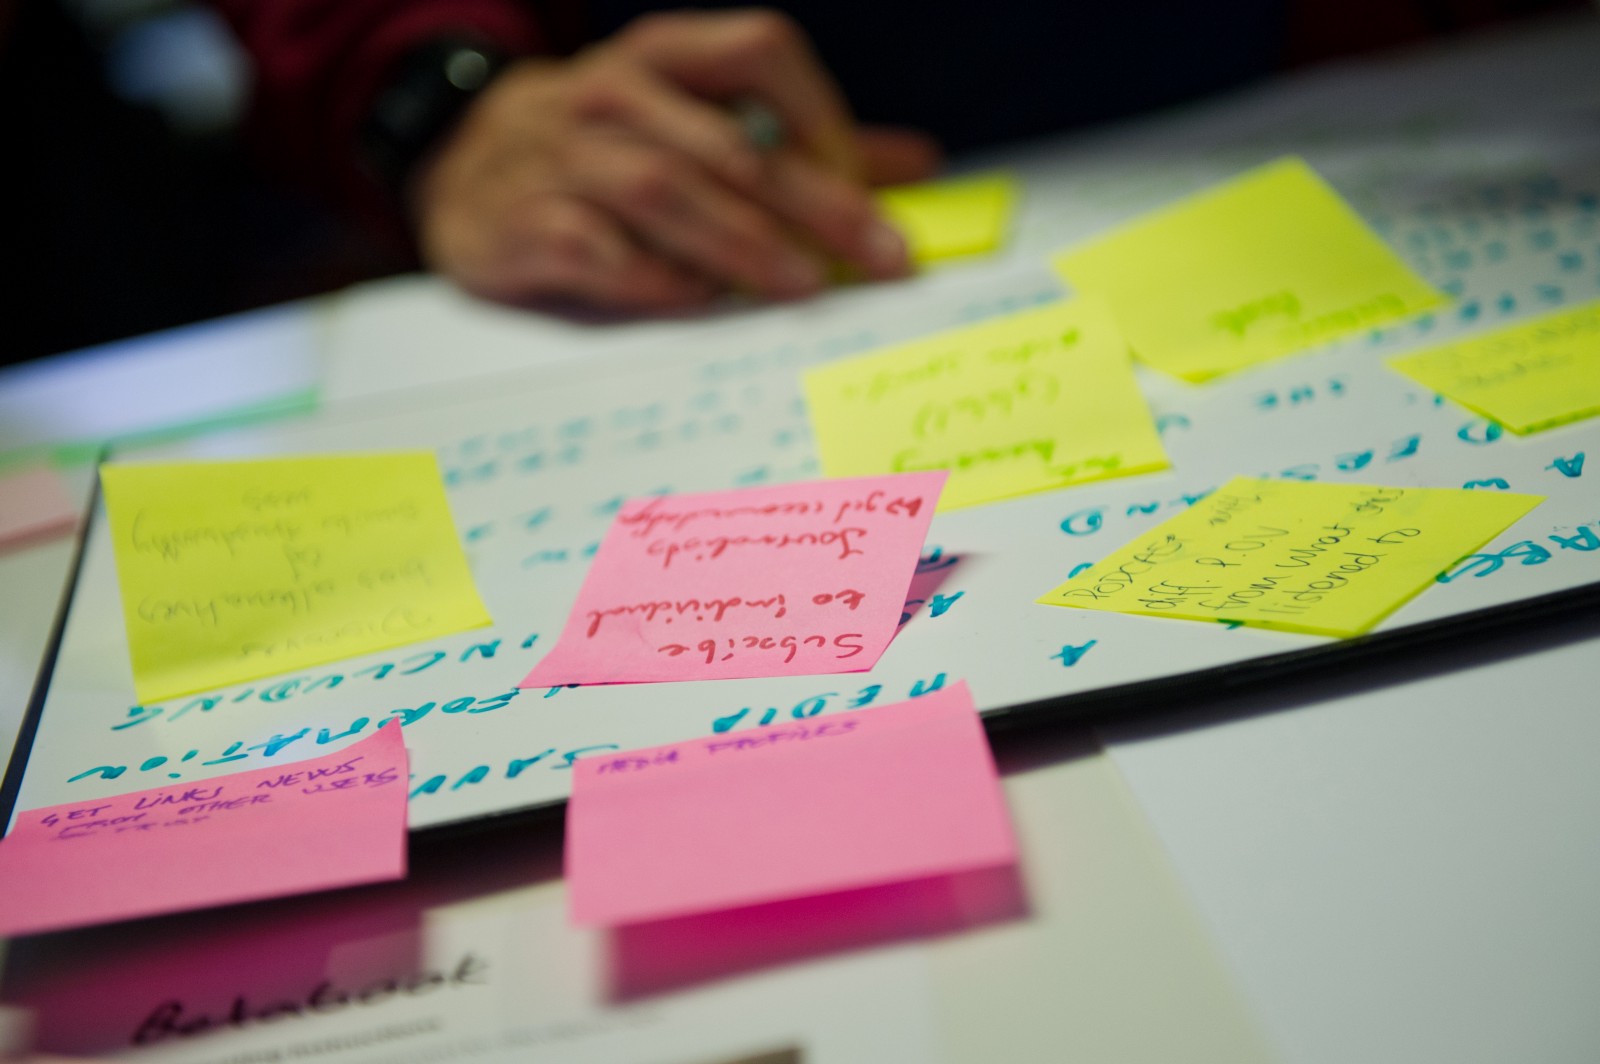 The future, inevitably, involves lots and lots of sticky notes